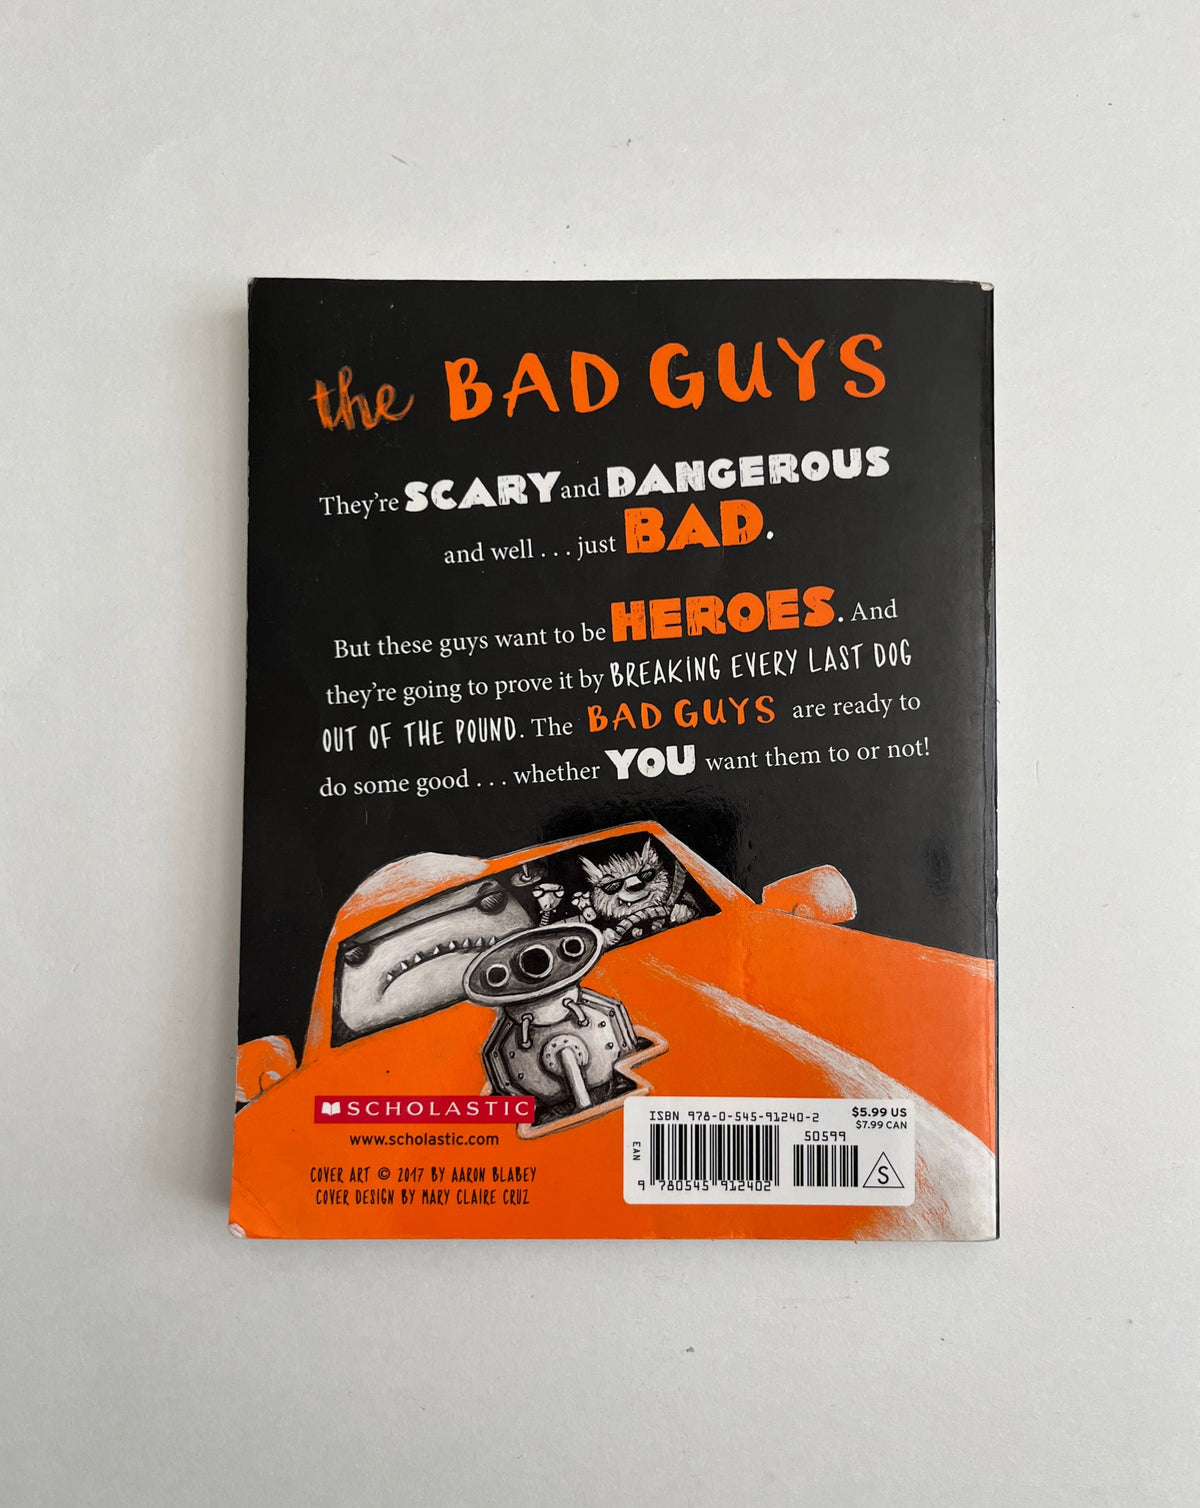 DONATE: The Bad Guys by Aaron Blabey